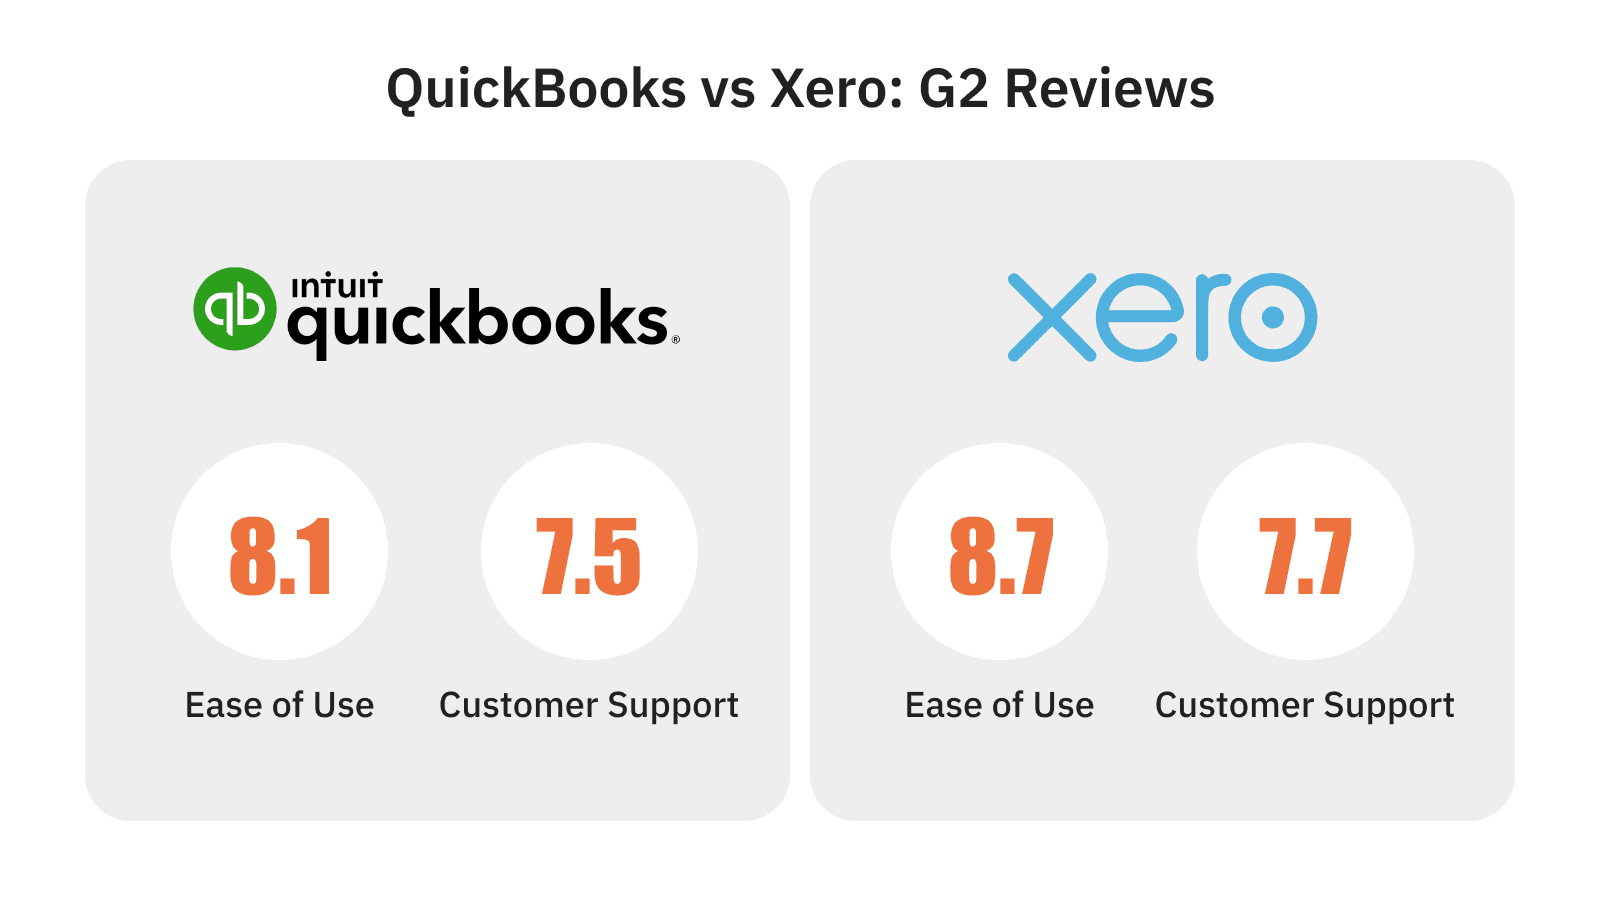 G2 reviews for QuickBooks and Xero